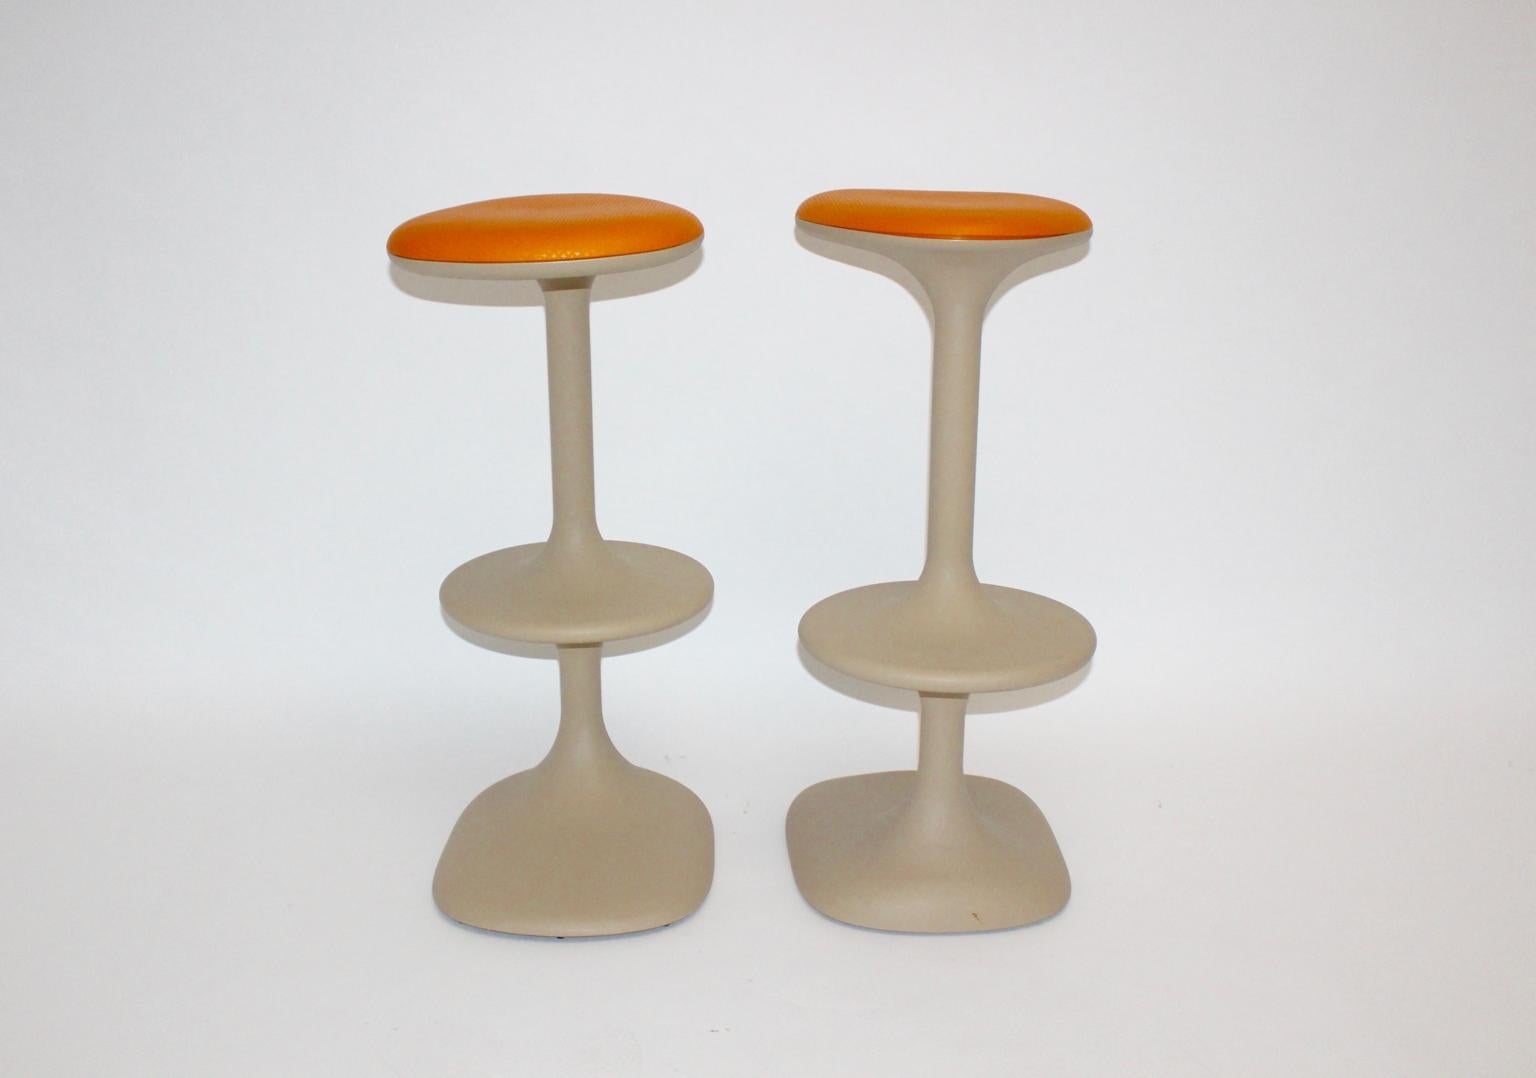 This pair of vintage stools named Kant was designed by Karim Rashid and produced by Casamania Italy. The name Kant stands for the philosophy by Immanuel Kant. Nature and Art show blurred boundaries.
The organic shaped stools were made of light